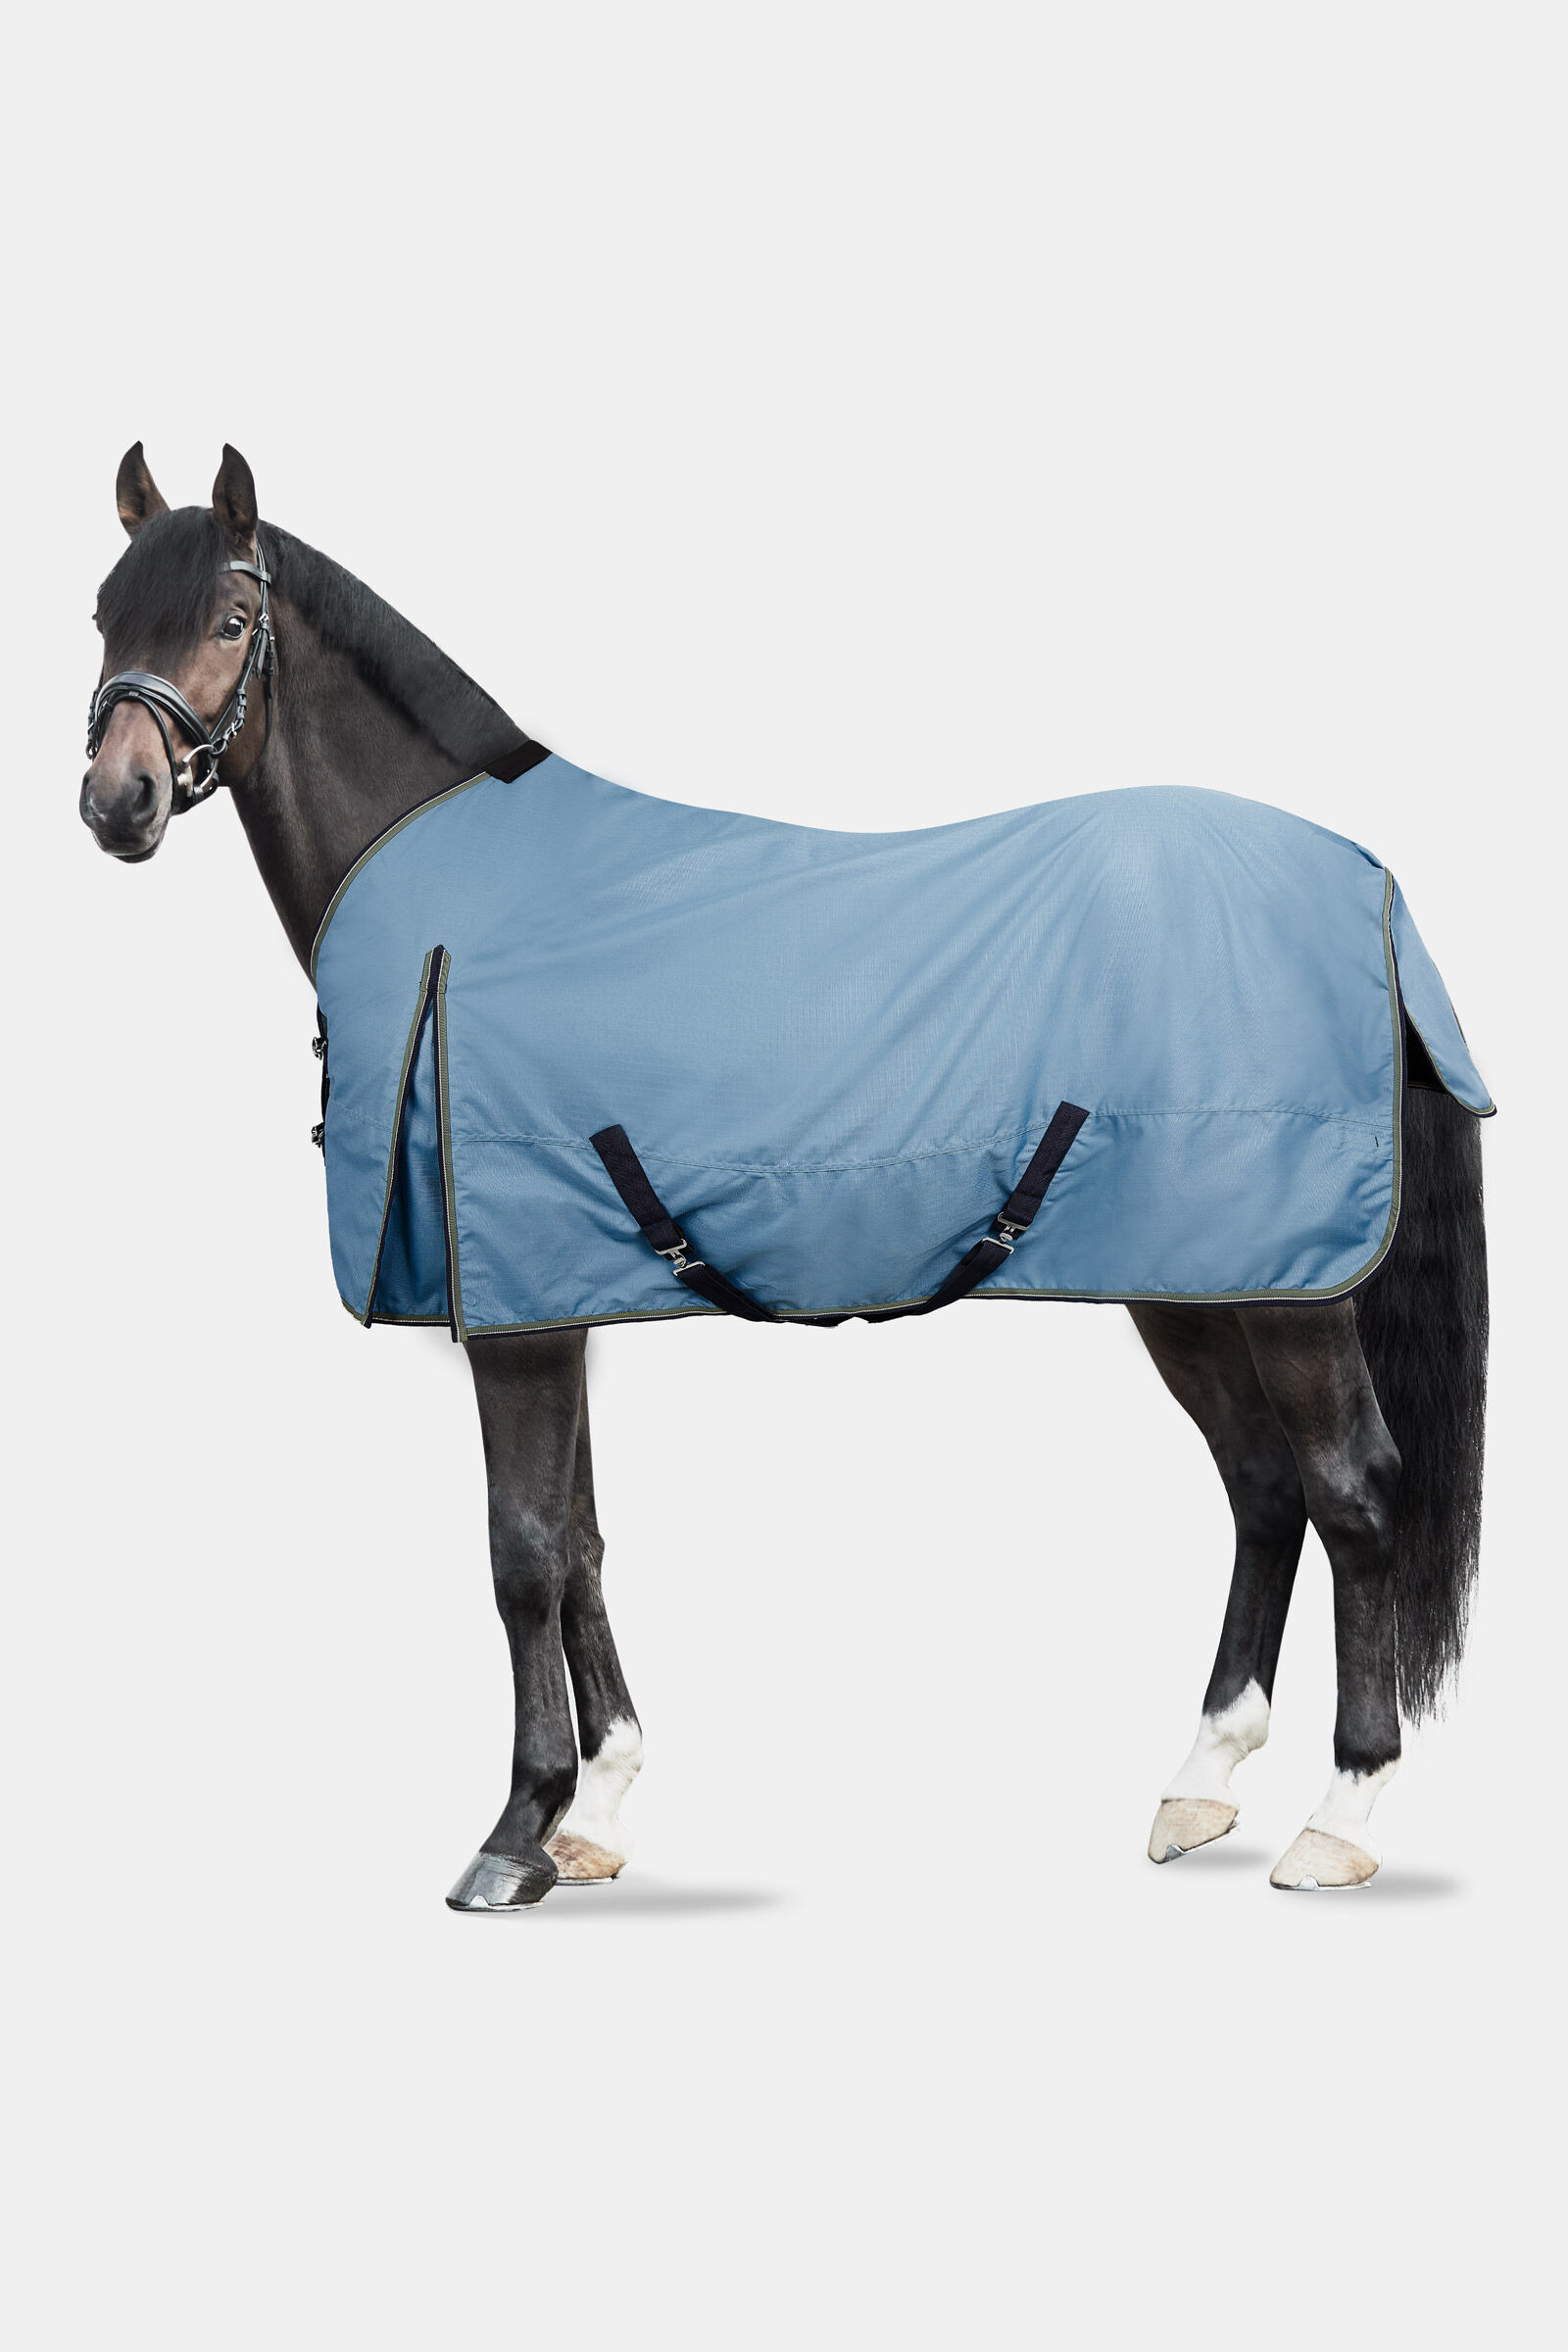 SALE TO CLEAR FLEECE RUG WITH AIR MESH PANELS  Sweat Drying cooler stable travel